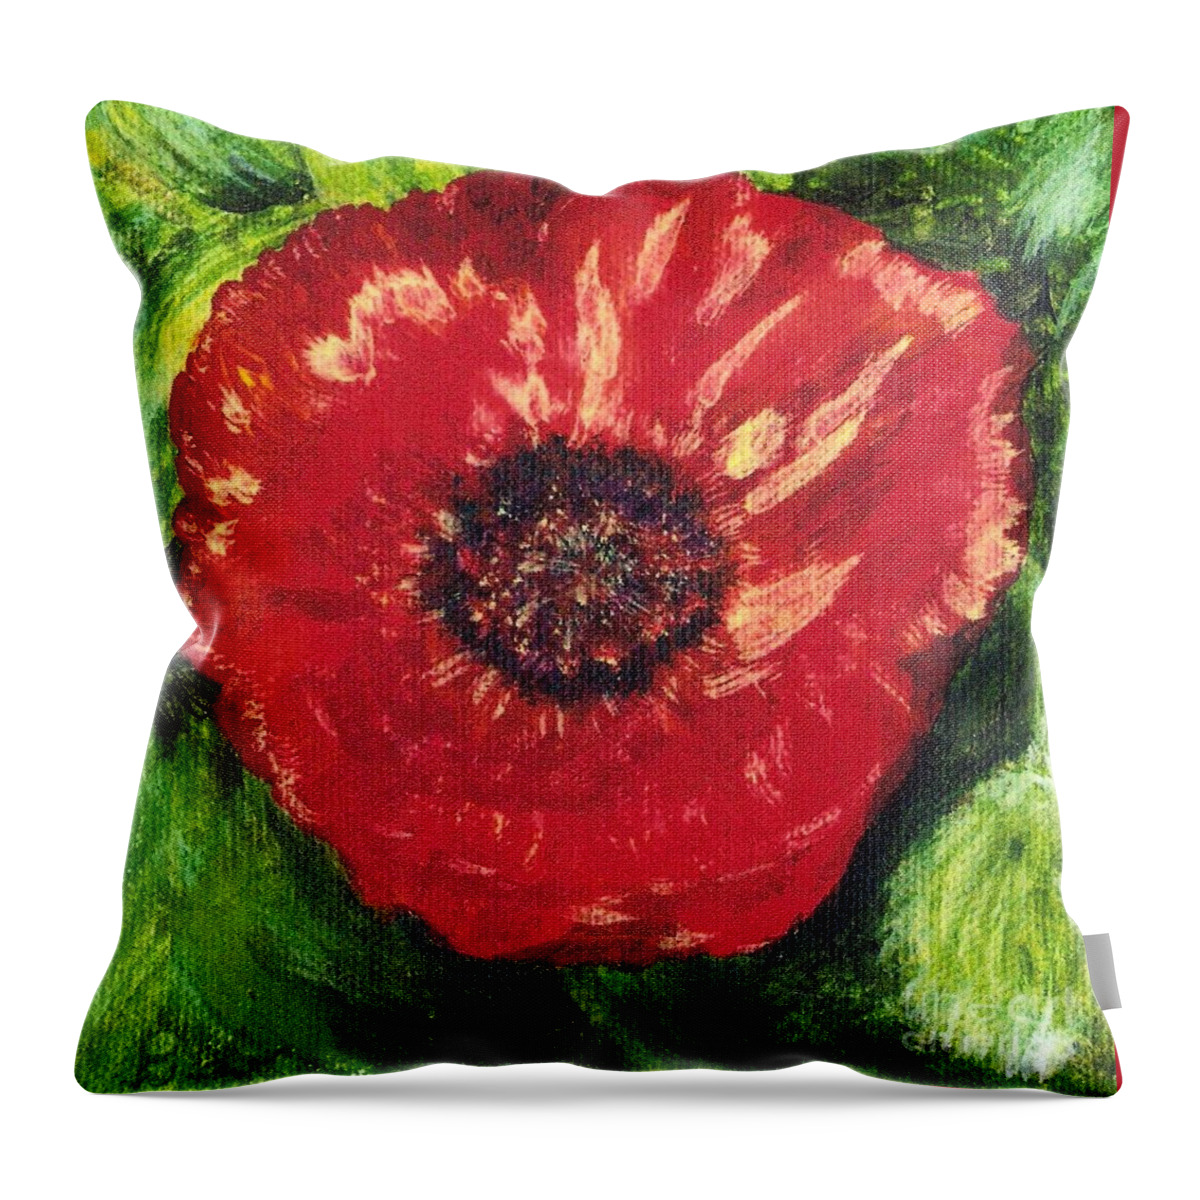 Poppy Throw Pillow featuring the painting Poppy by Deb Stroh-Larson